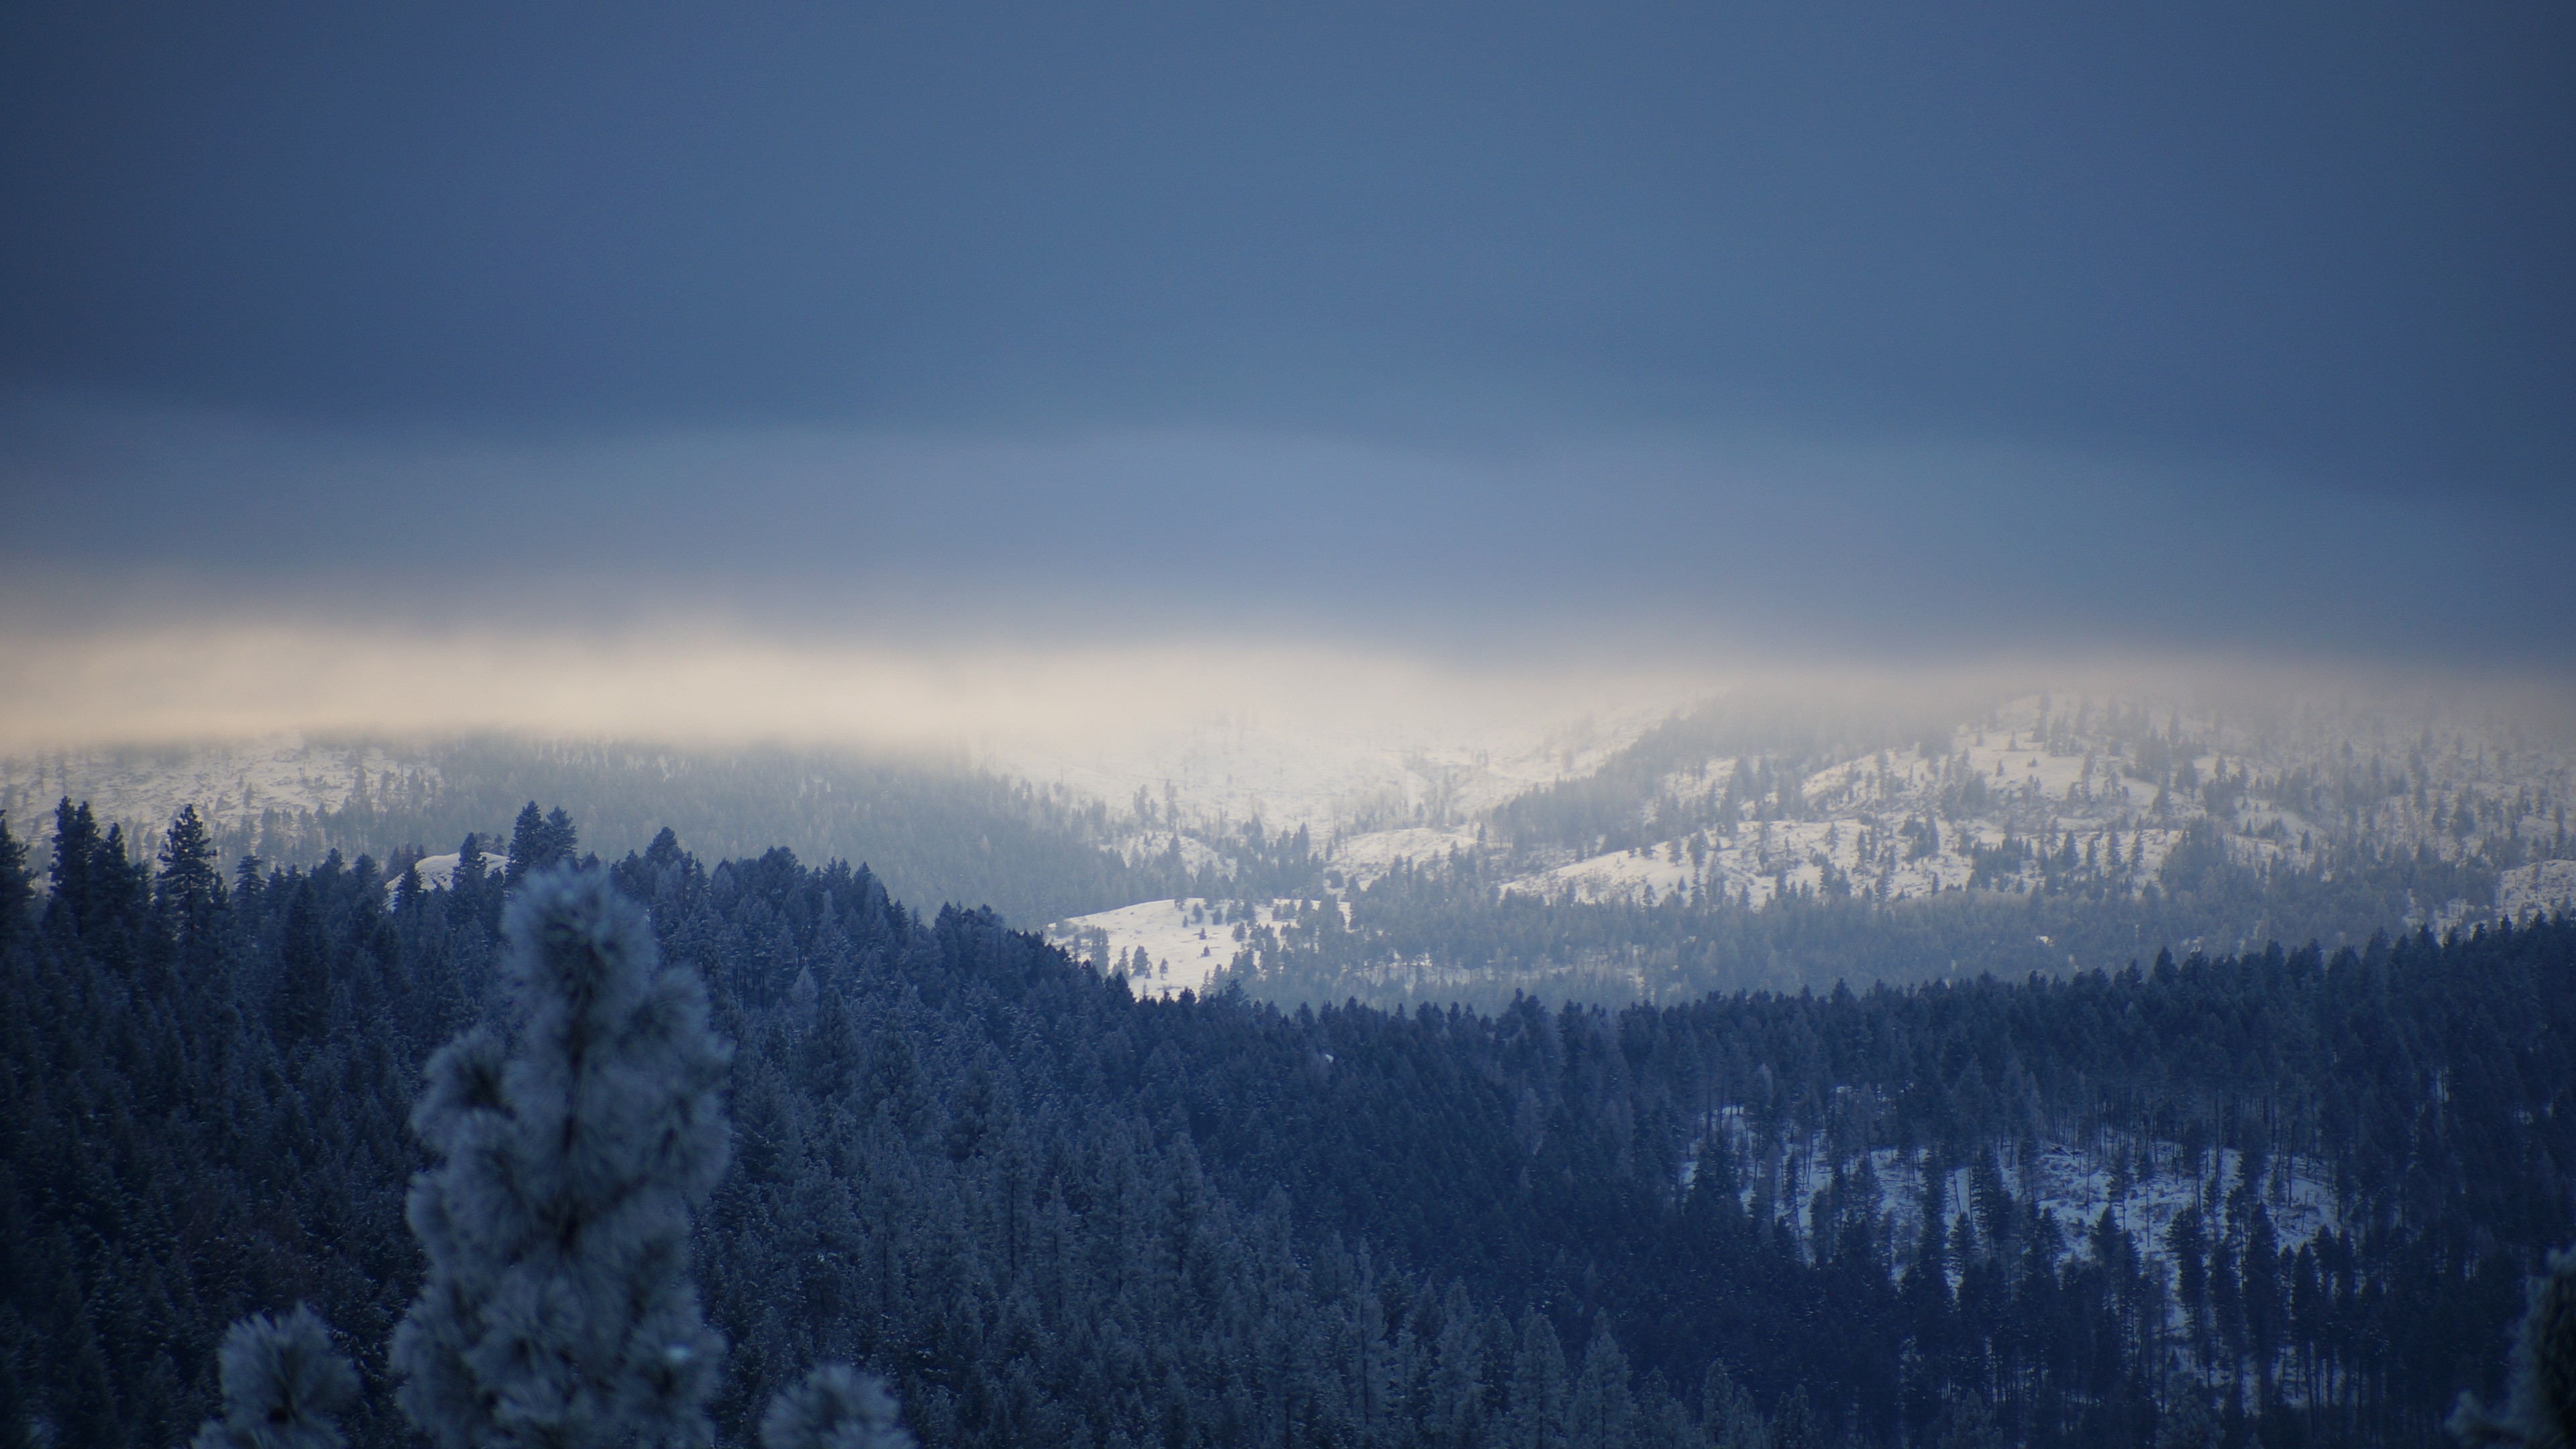 General 3840x2160 mountains overcast snow pine trees winter hills forest far view